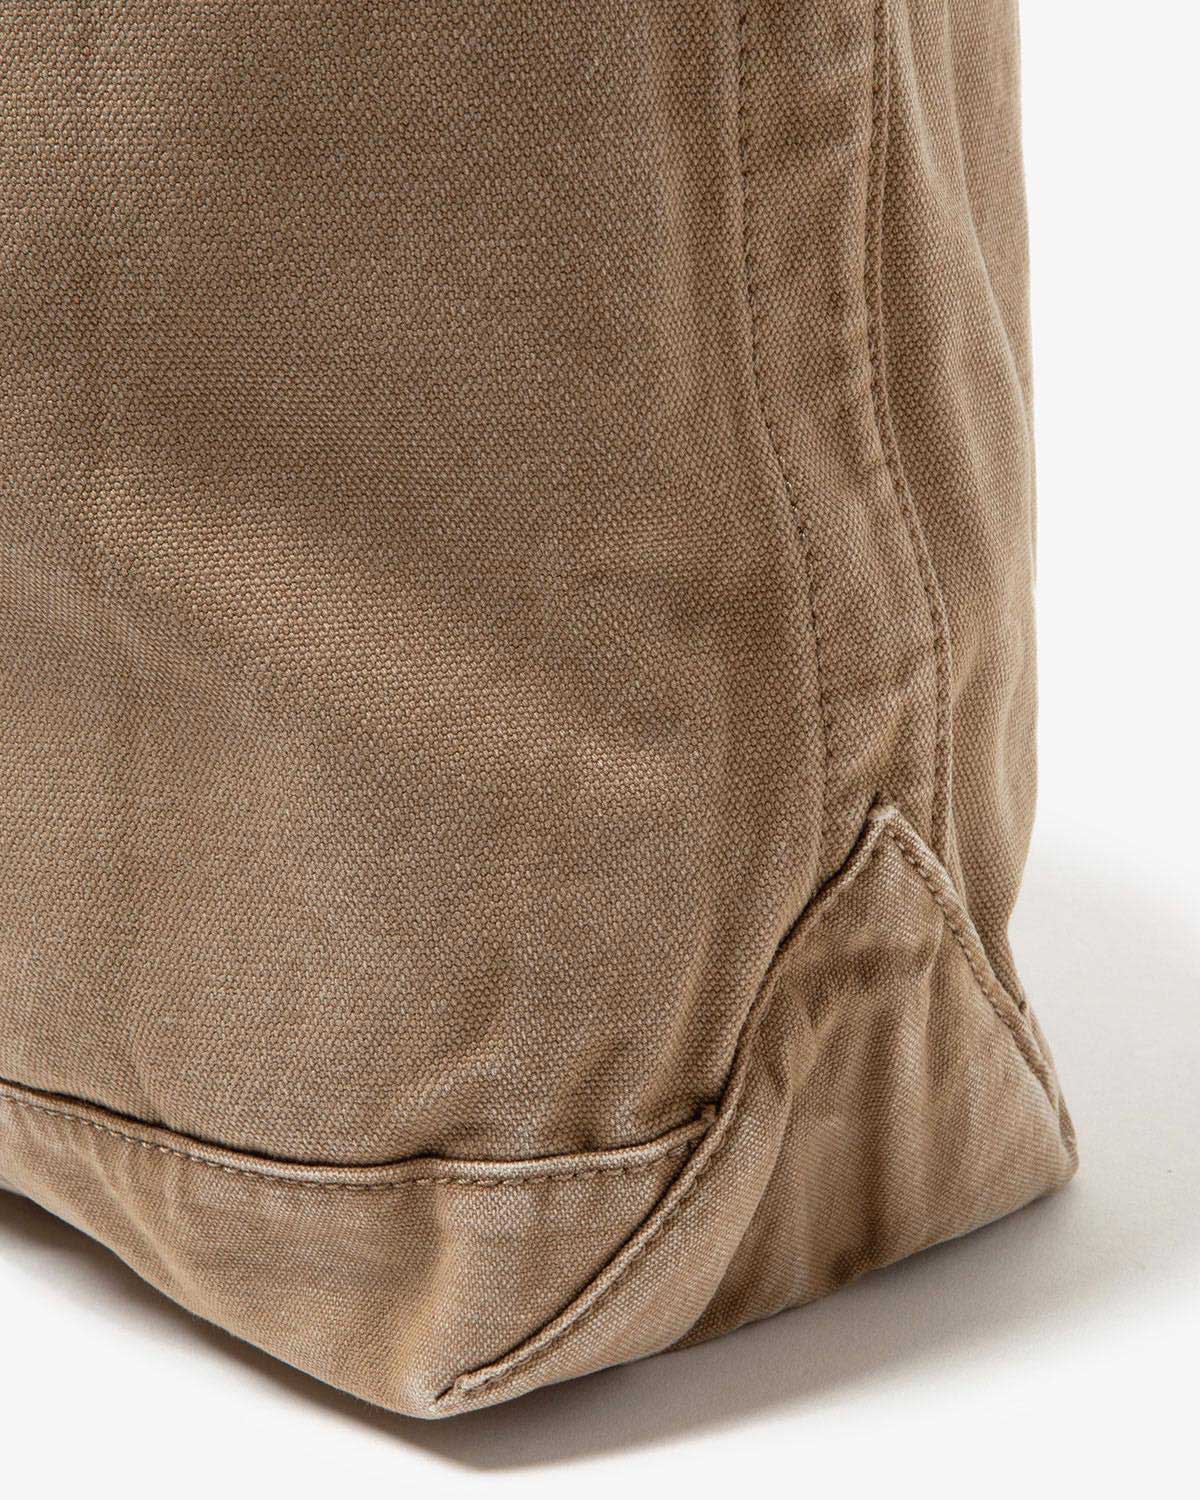 TOTE BAG COTTON CANVAS COFFEE DYED